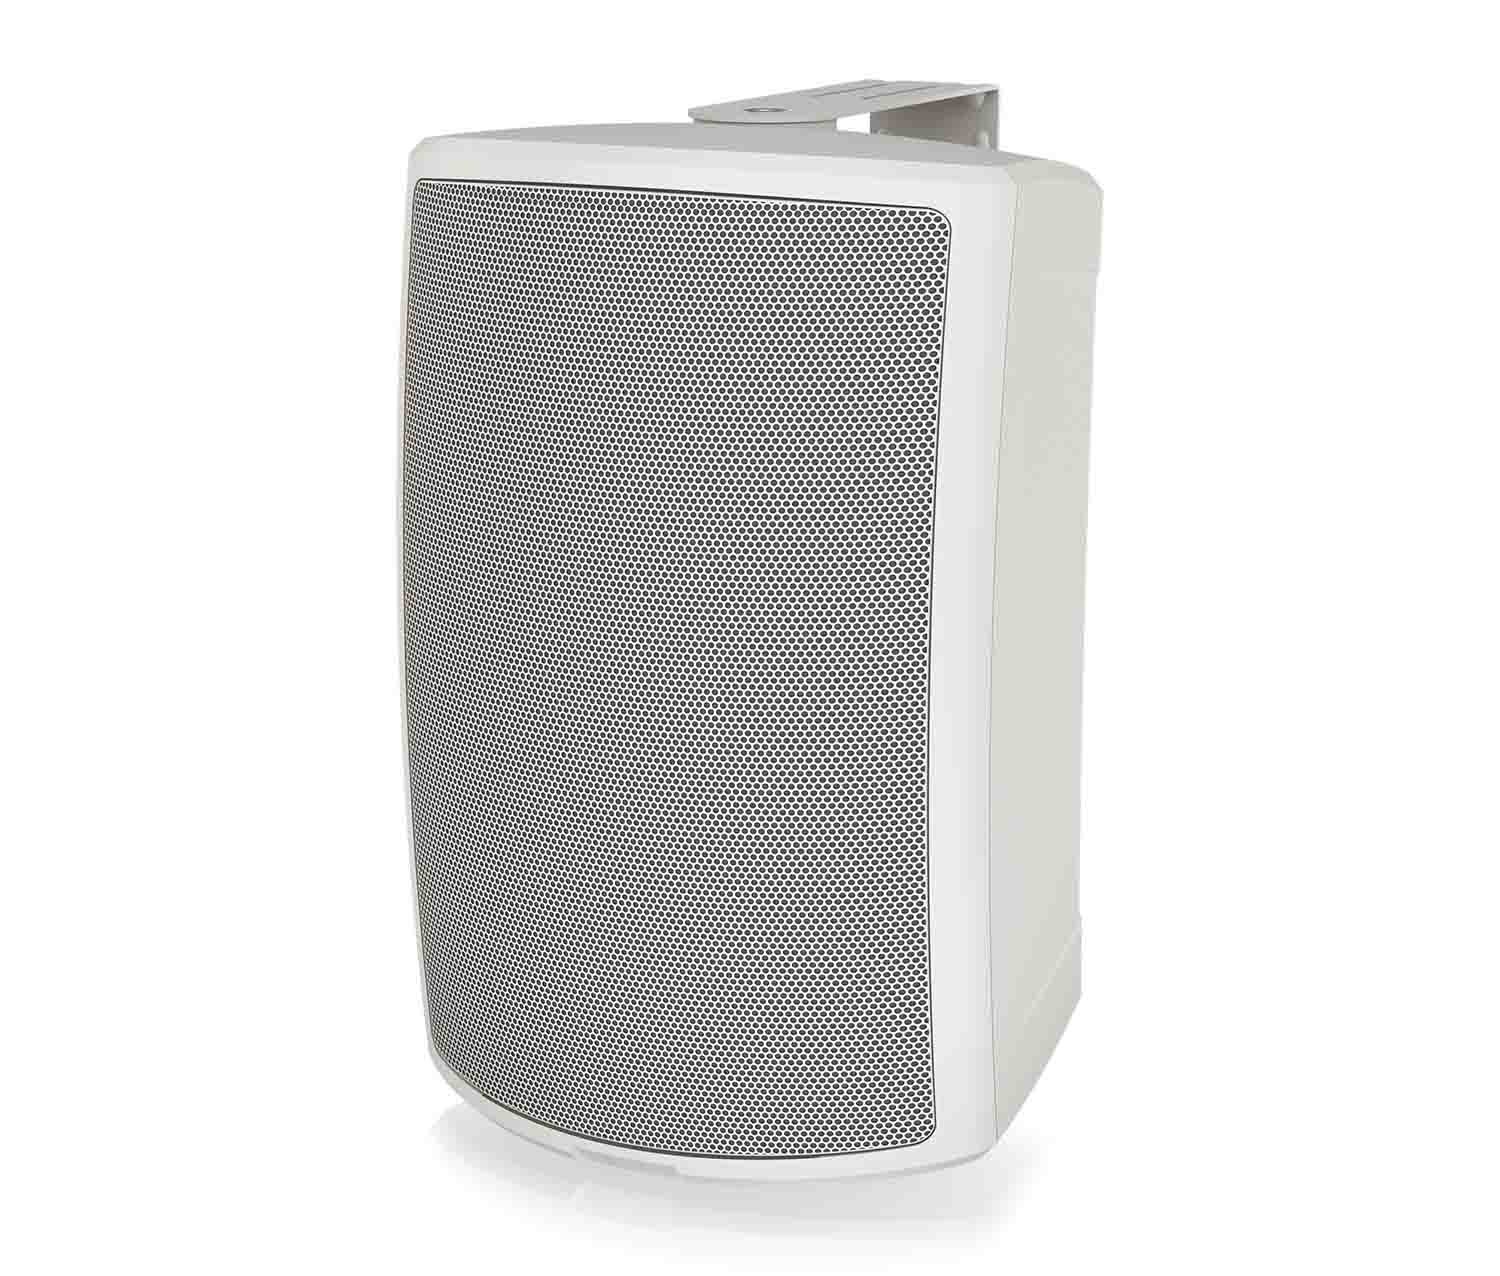 Tannoy AMS 6ICT-WH, 6-Inch ICT Surface-Mount Loudspeaker for Installation Applications - White - Hollywood DJ